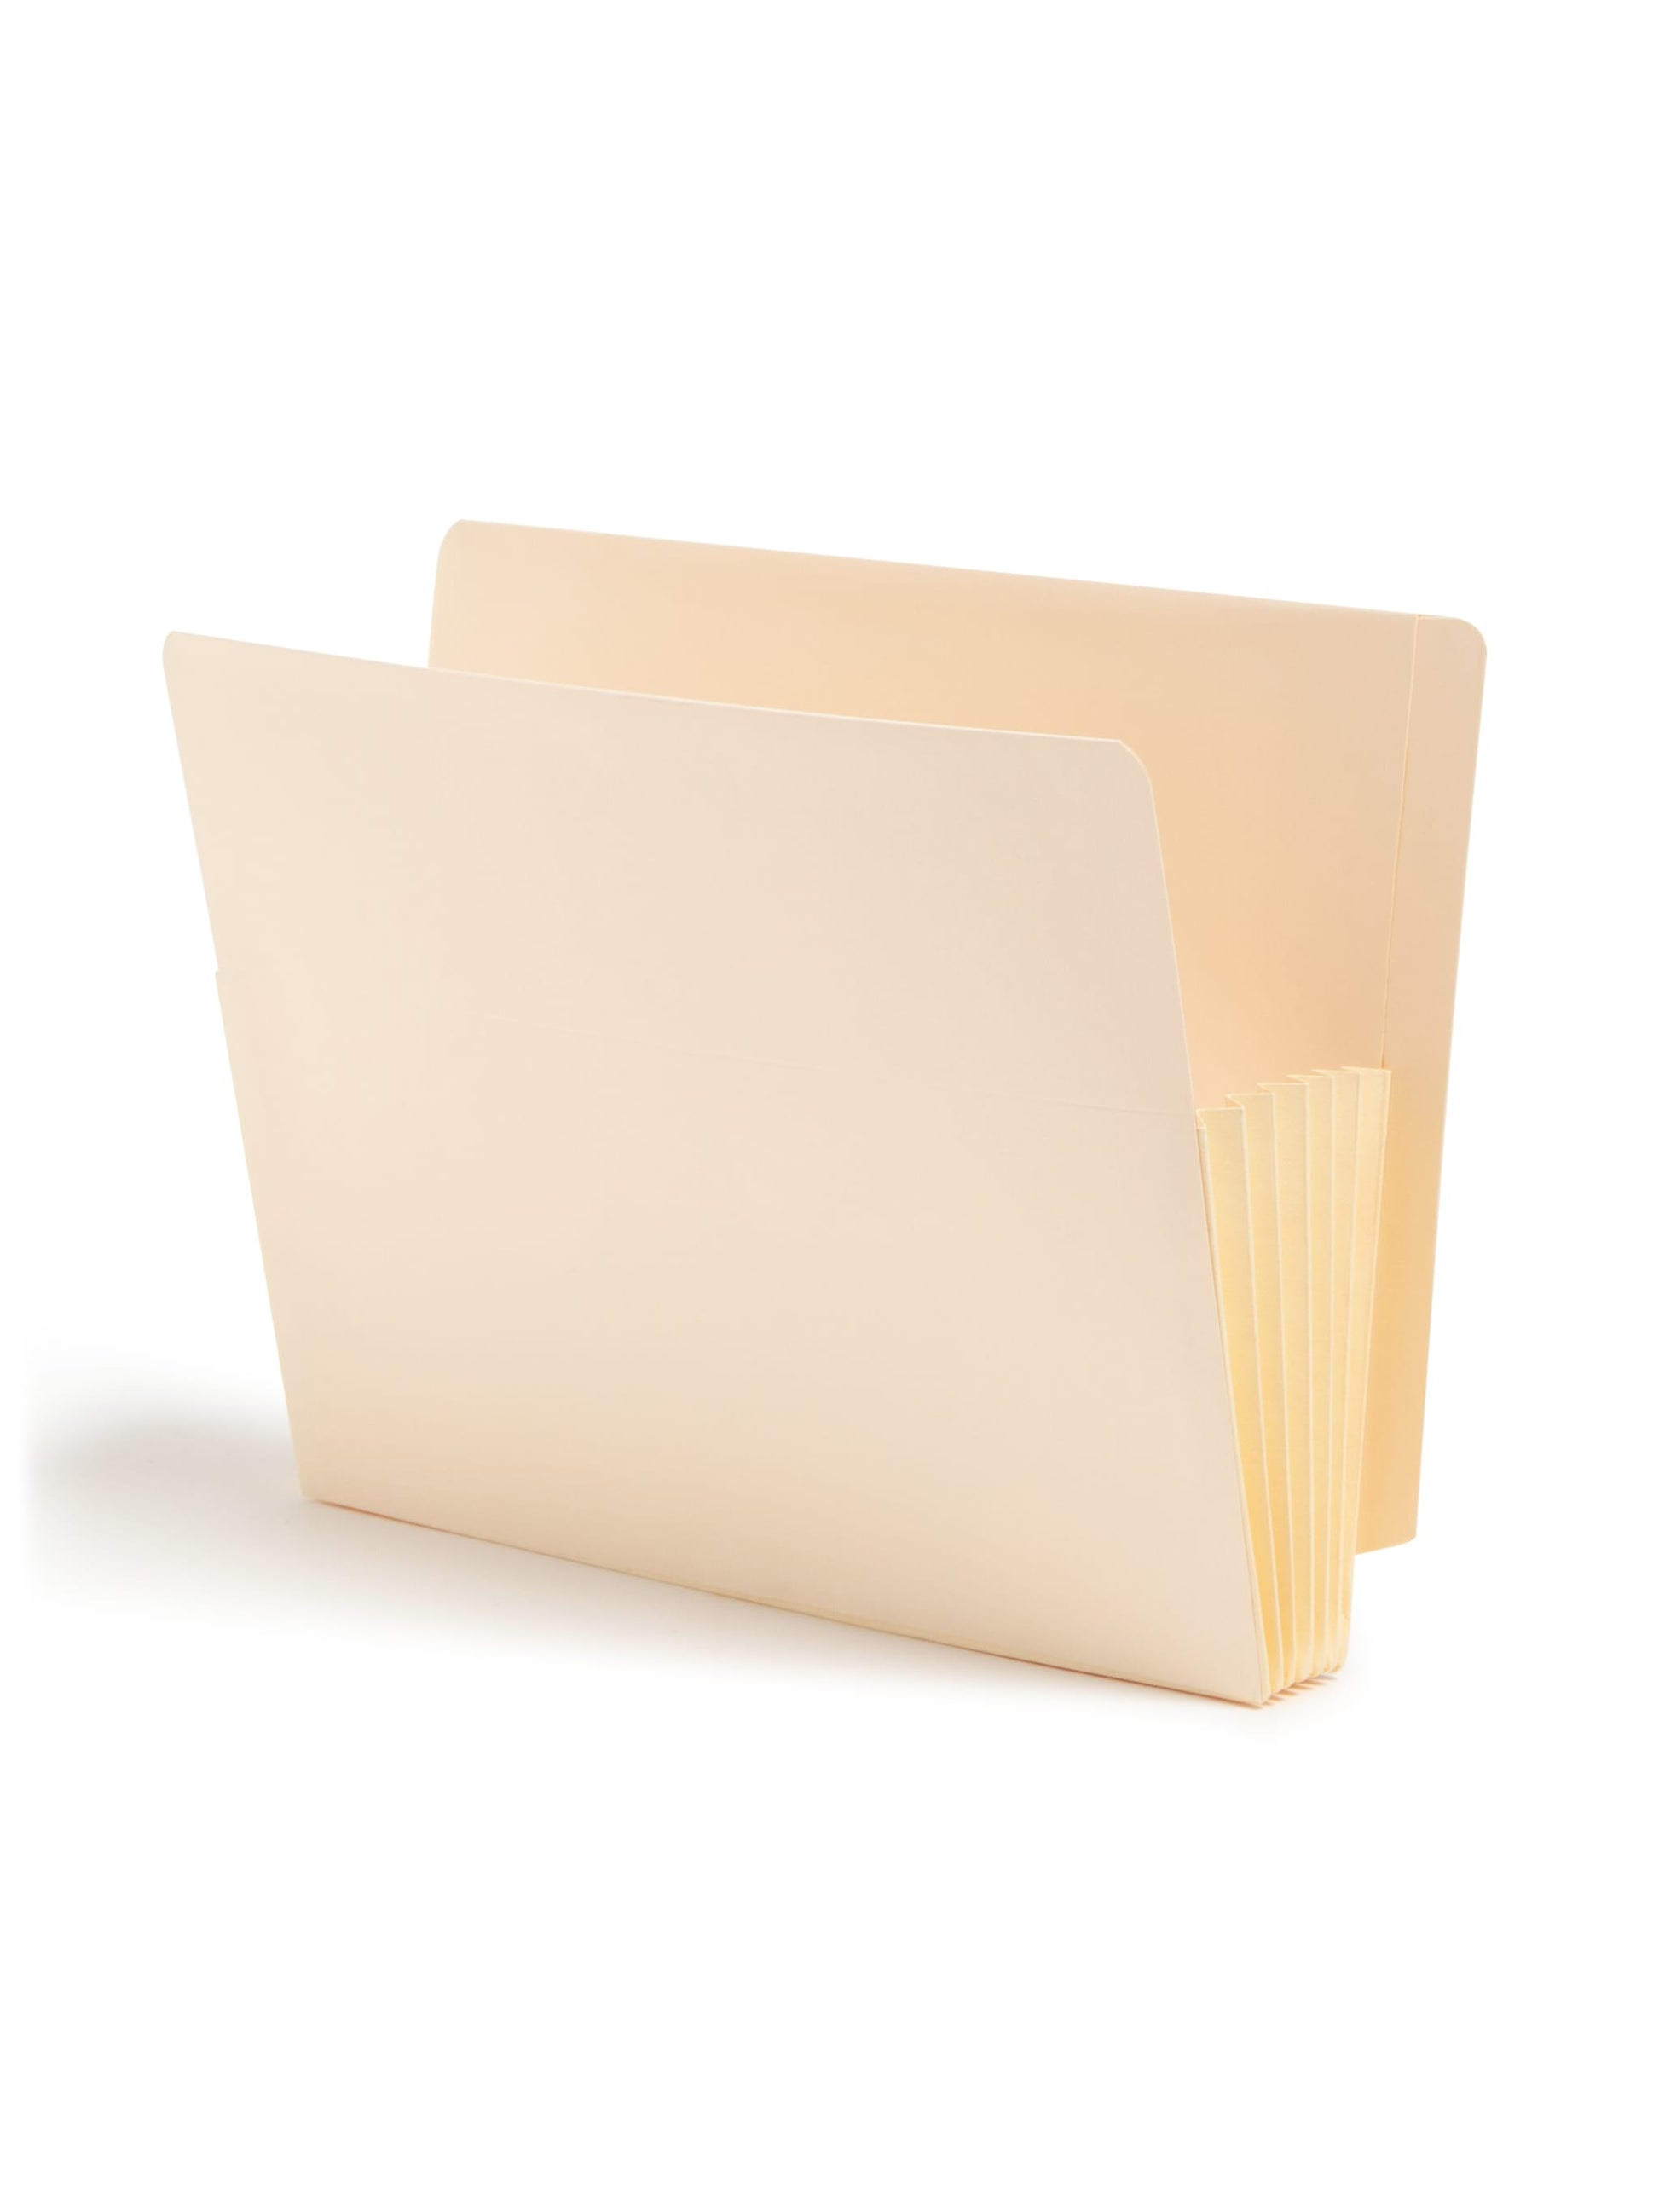 Reinforced End Tab File Pockets, Straight-Cut Tab, 5-1/4 inch Expansion, Manila Color, Letter Size, Set of 0, 30086486751743